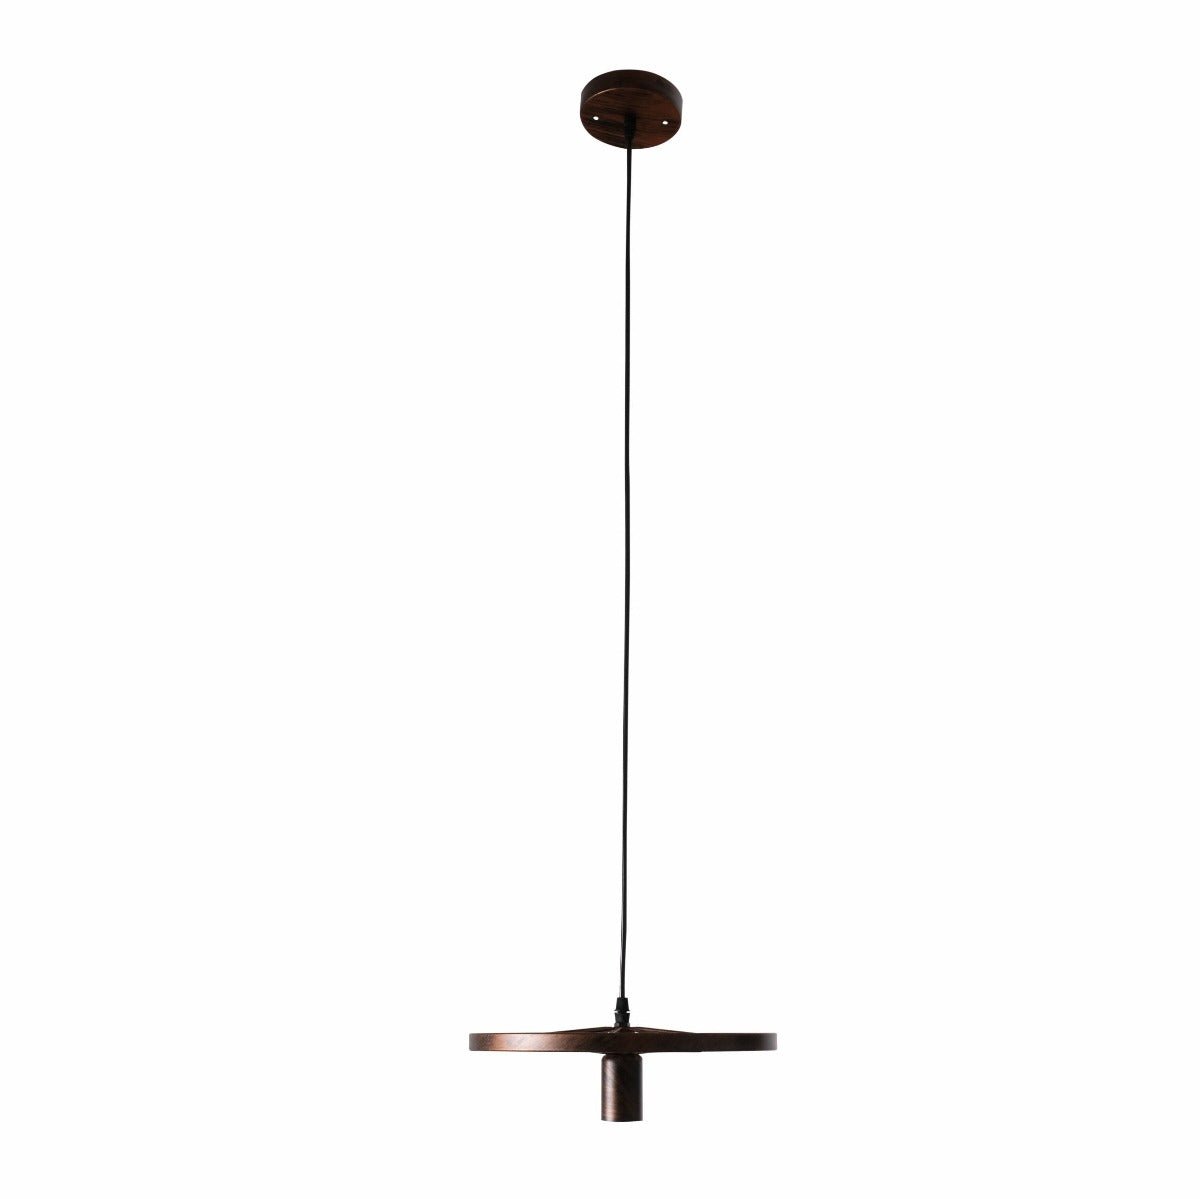 Main image of Vintage Industrial Wagon Wheel Pendant Light with E27 Fitting | TEKLED 158-17888